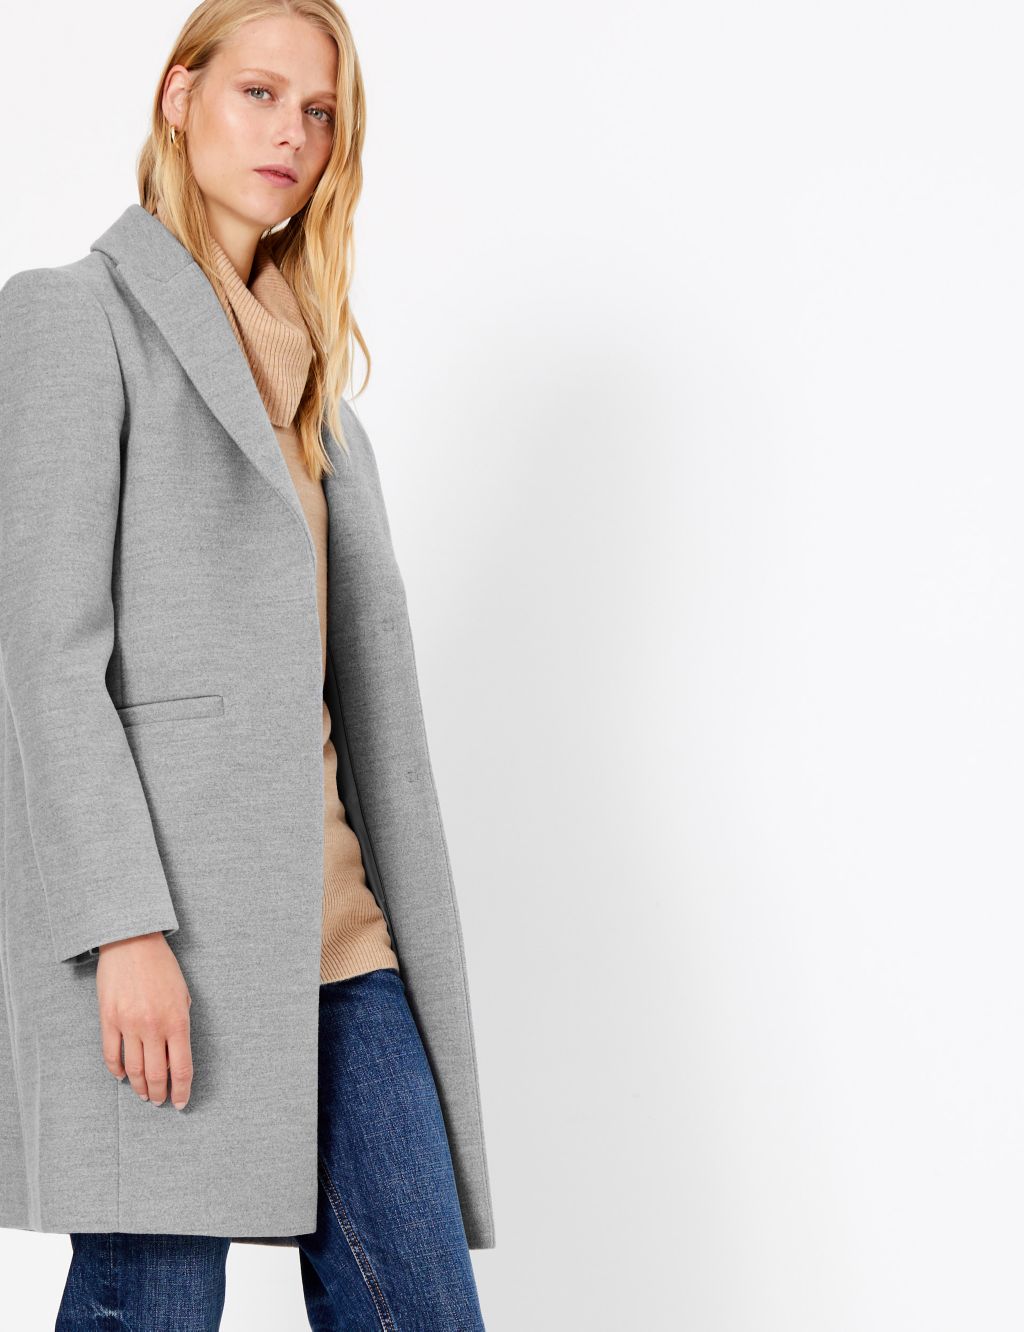 Soft Touch City Coat | M&S Collection | M&S